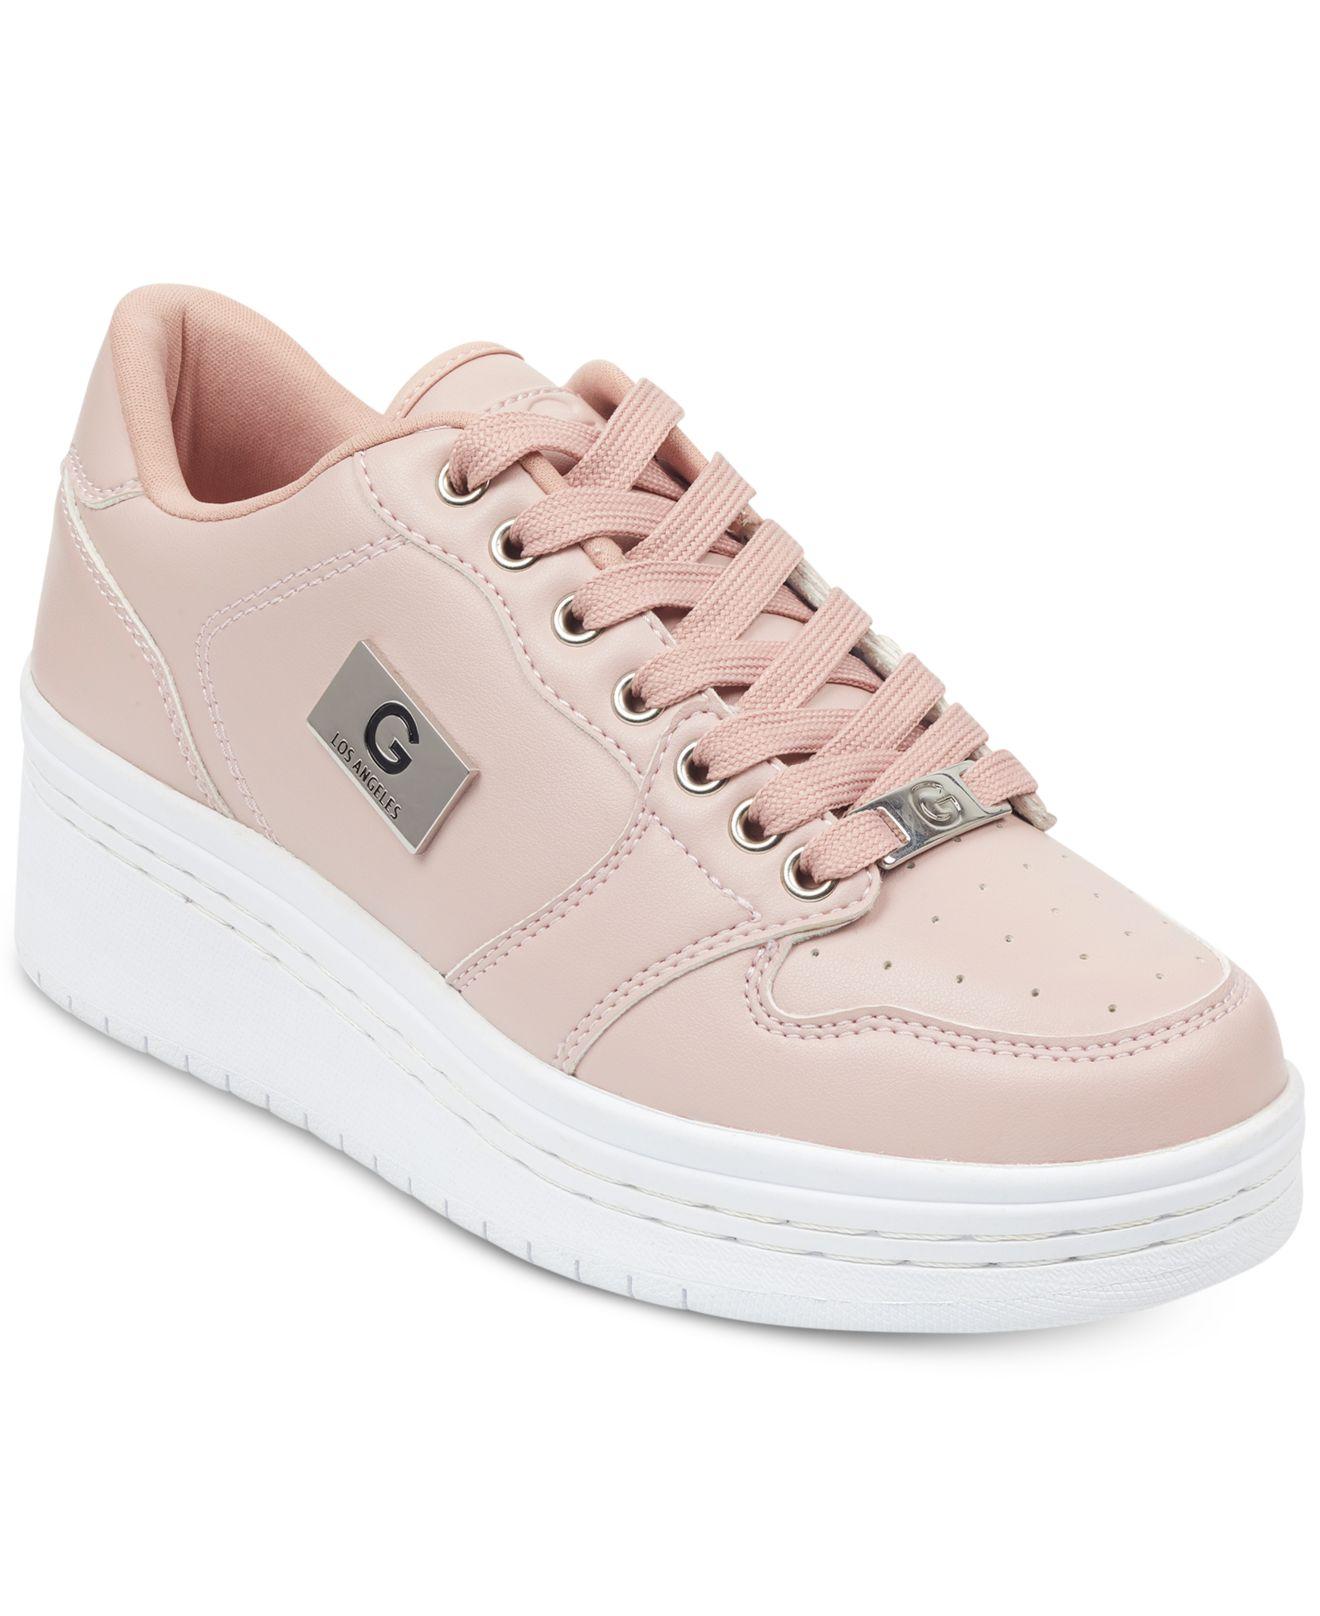 G by Guess Rigster Wedge Sneakers in 